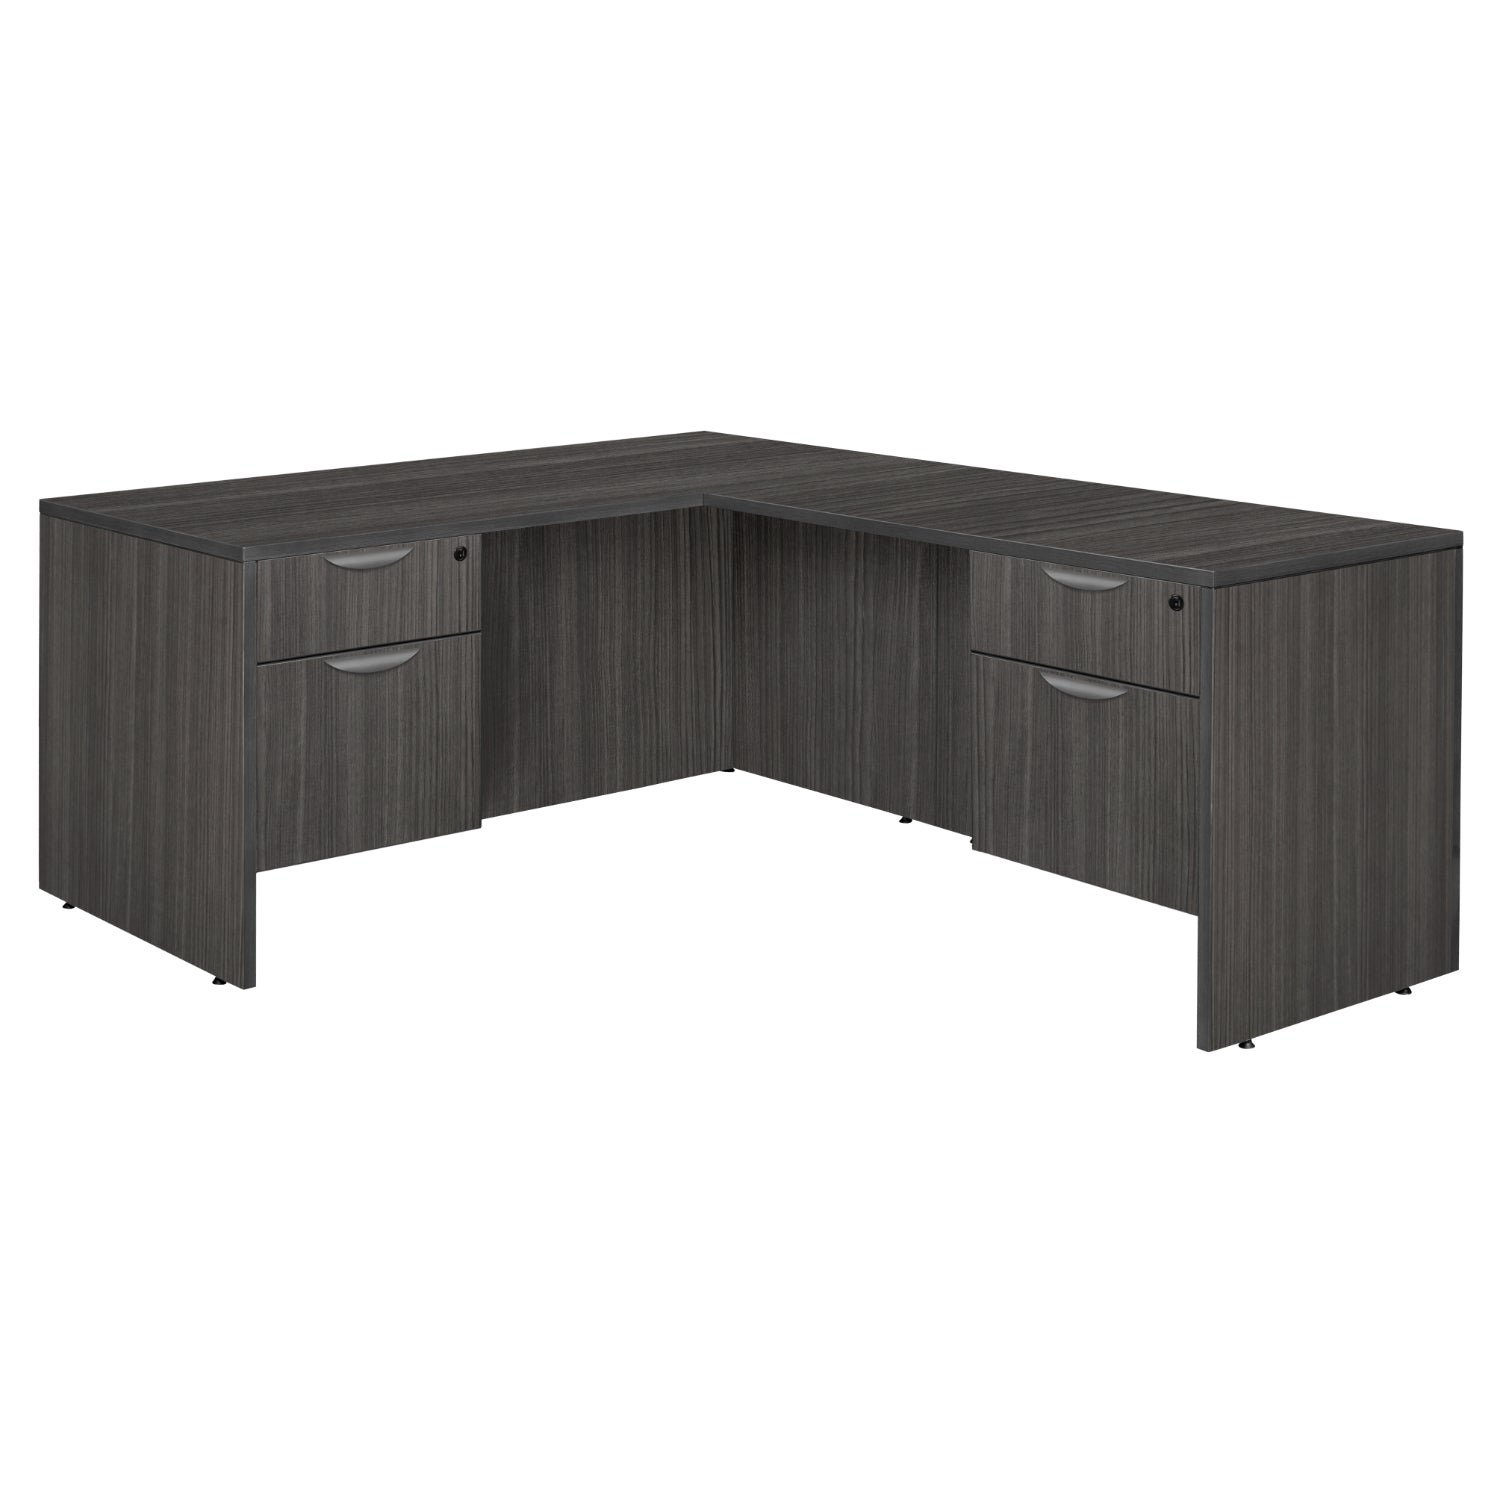 Legacy Collection 60" Double Pedestal L-Desk with 47" Return